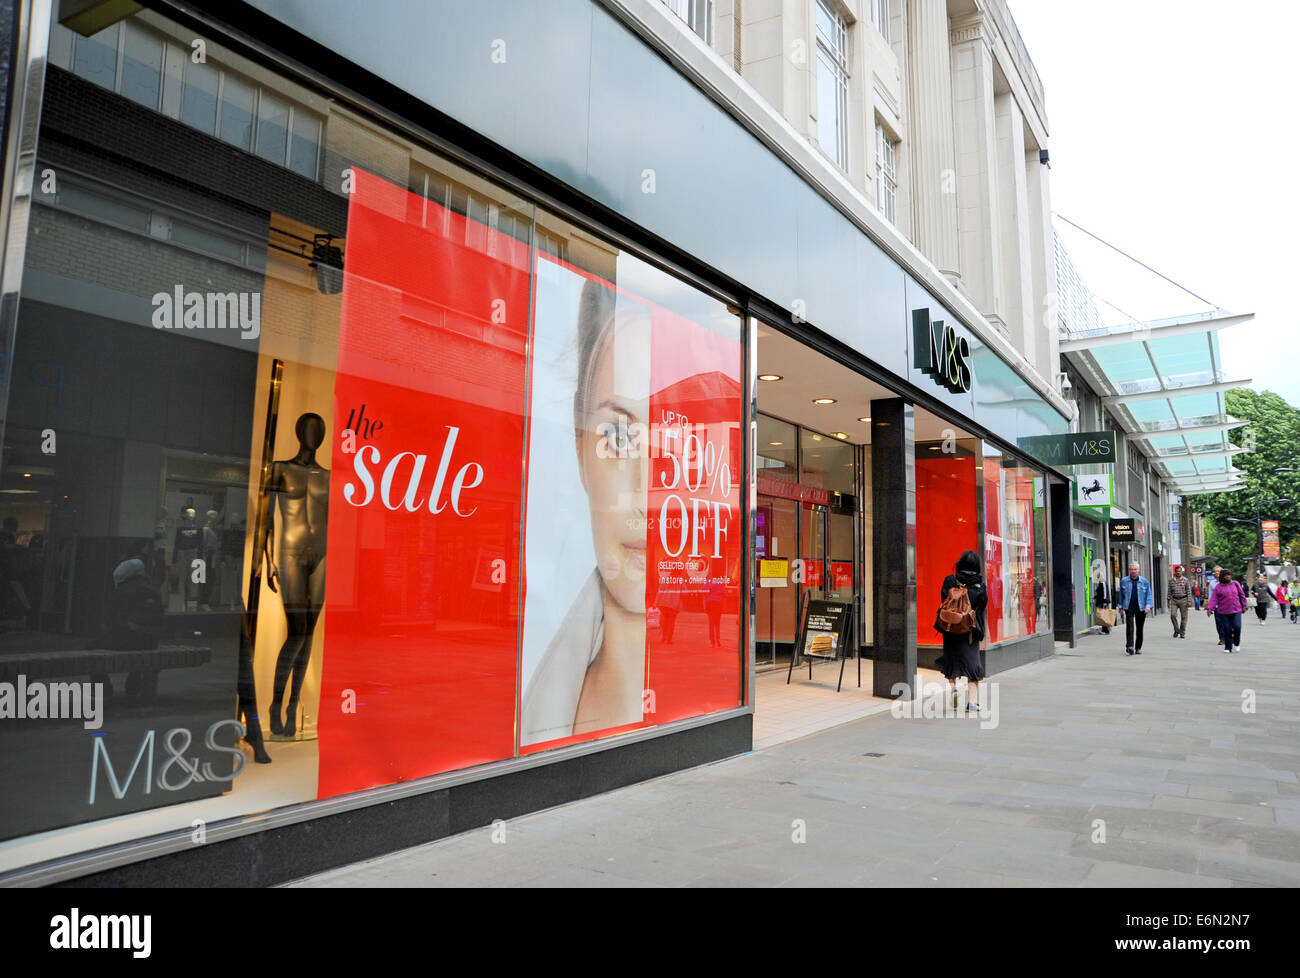 Swindon Wiltshire UK - The main Swindon town centre shopping precinct with M&S department store with Sale Sign in window Stock Photo